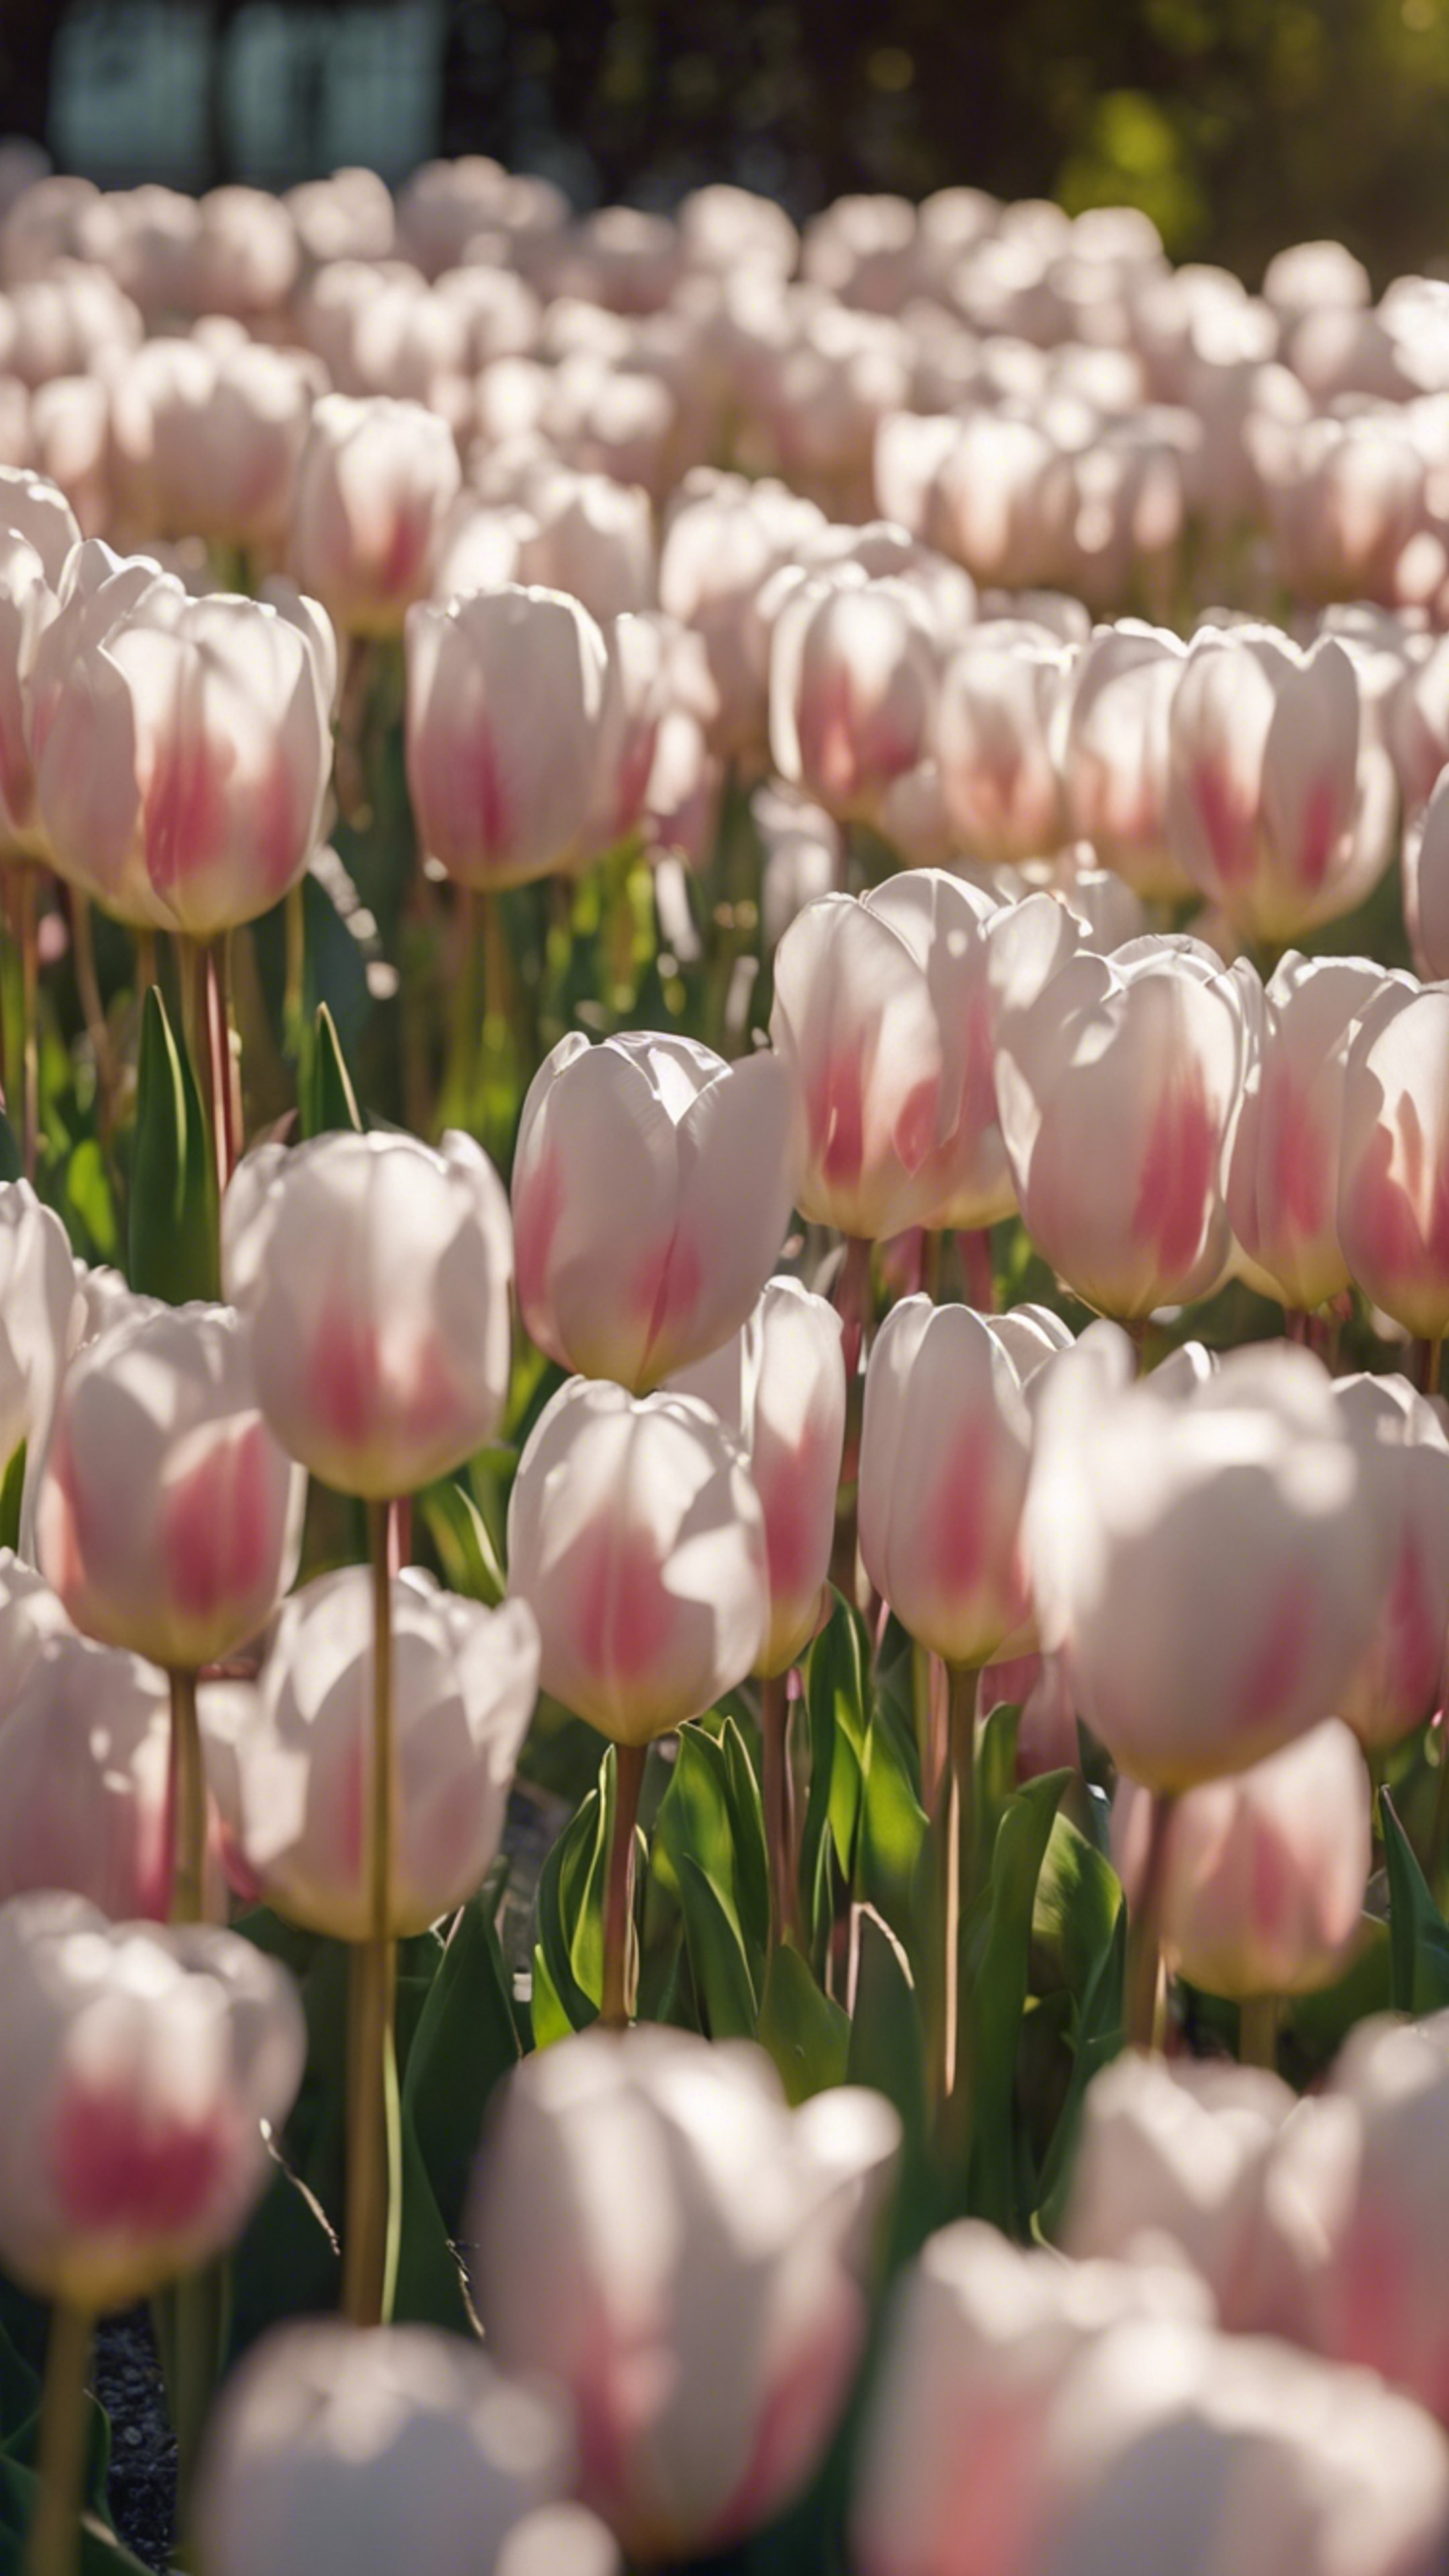 A garden filled with white and pink tulips, shimmering under the soft glow of a morning sun. Wallpaper[0043435f230e41f4a509]